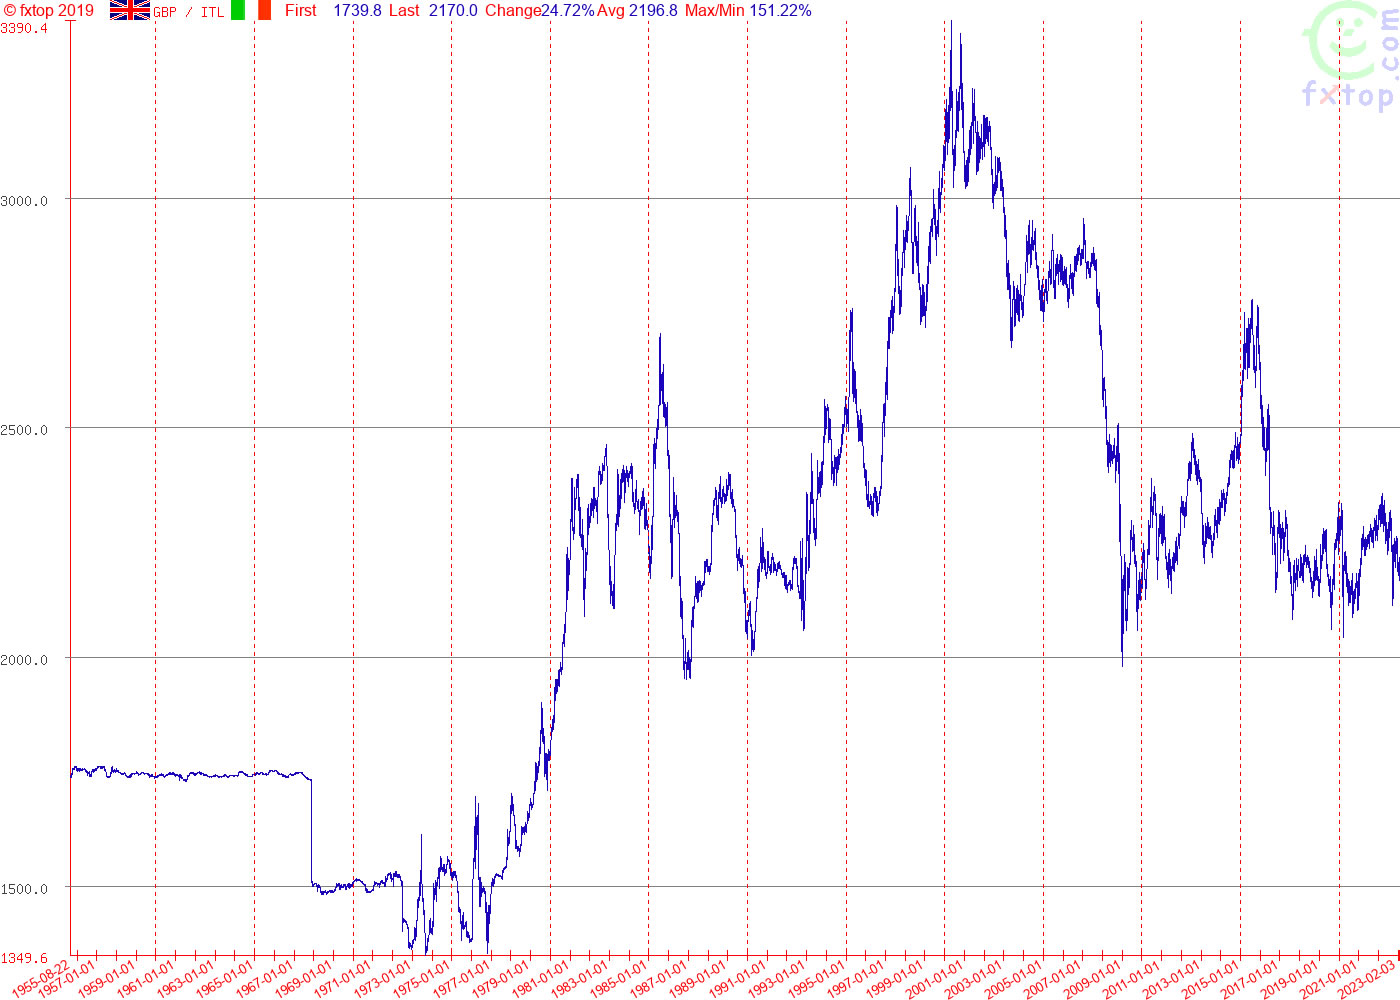 Graph of the exchange rate of the pound sterling (GBP) against the Italian lira (ITL) 1953-2023.